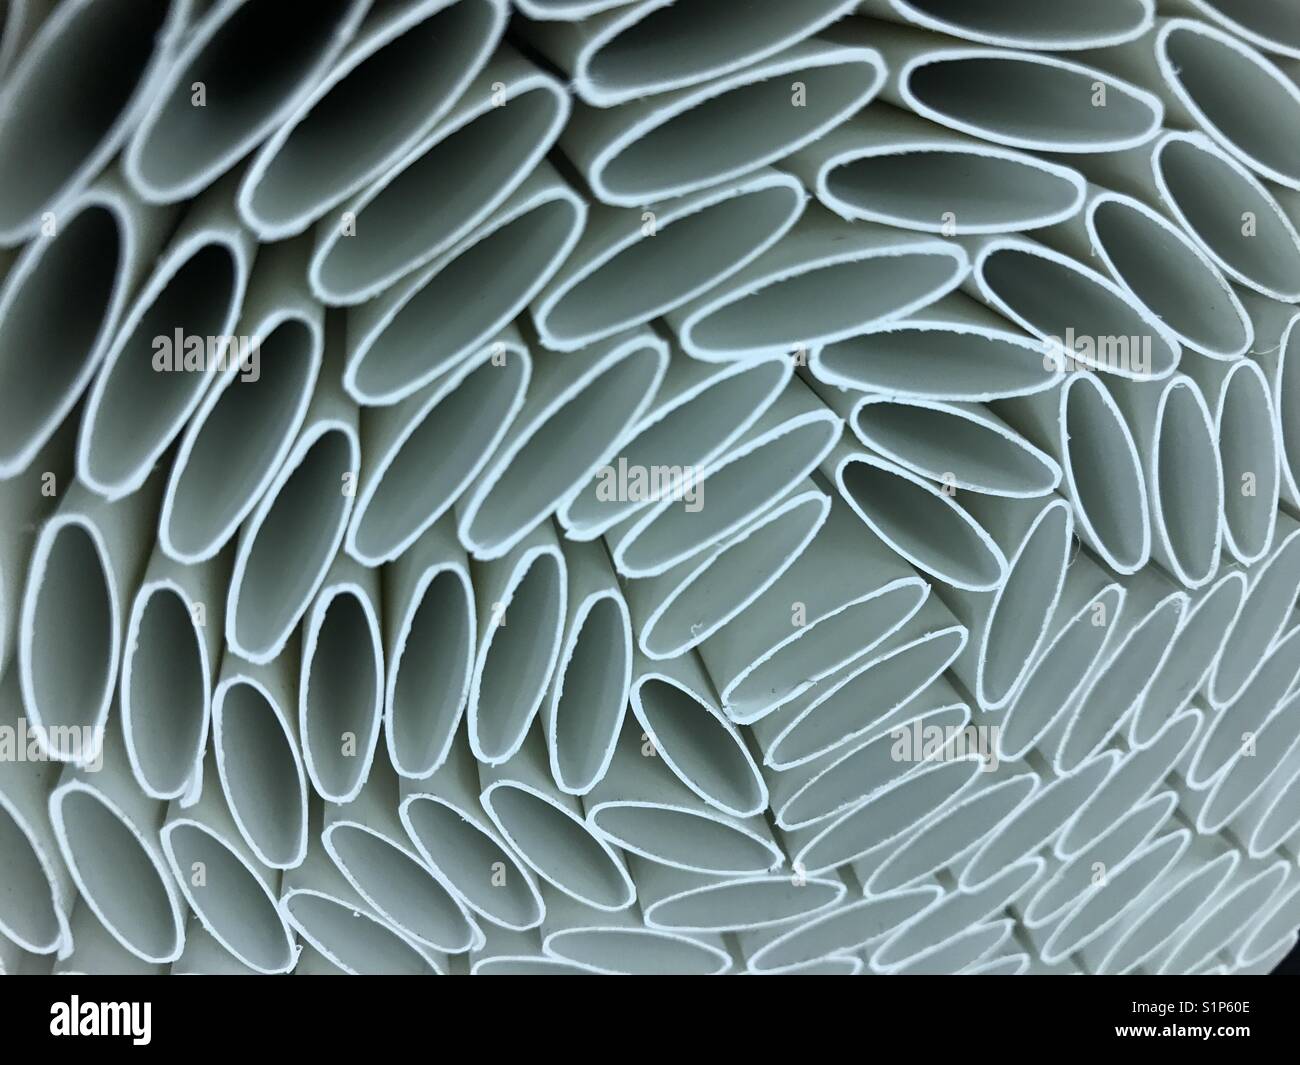 Abstract detail of plastic tubes looking like cells Stock Photo